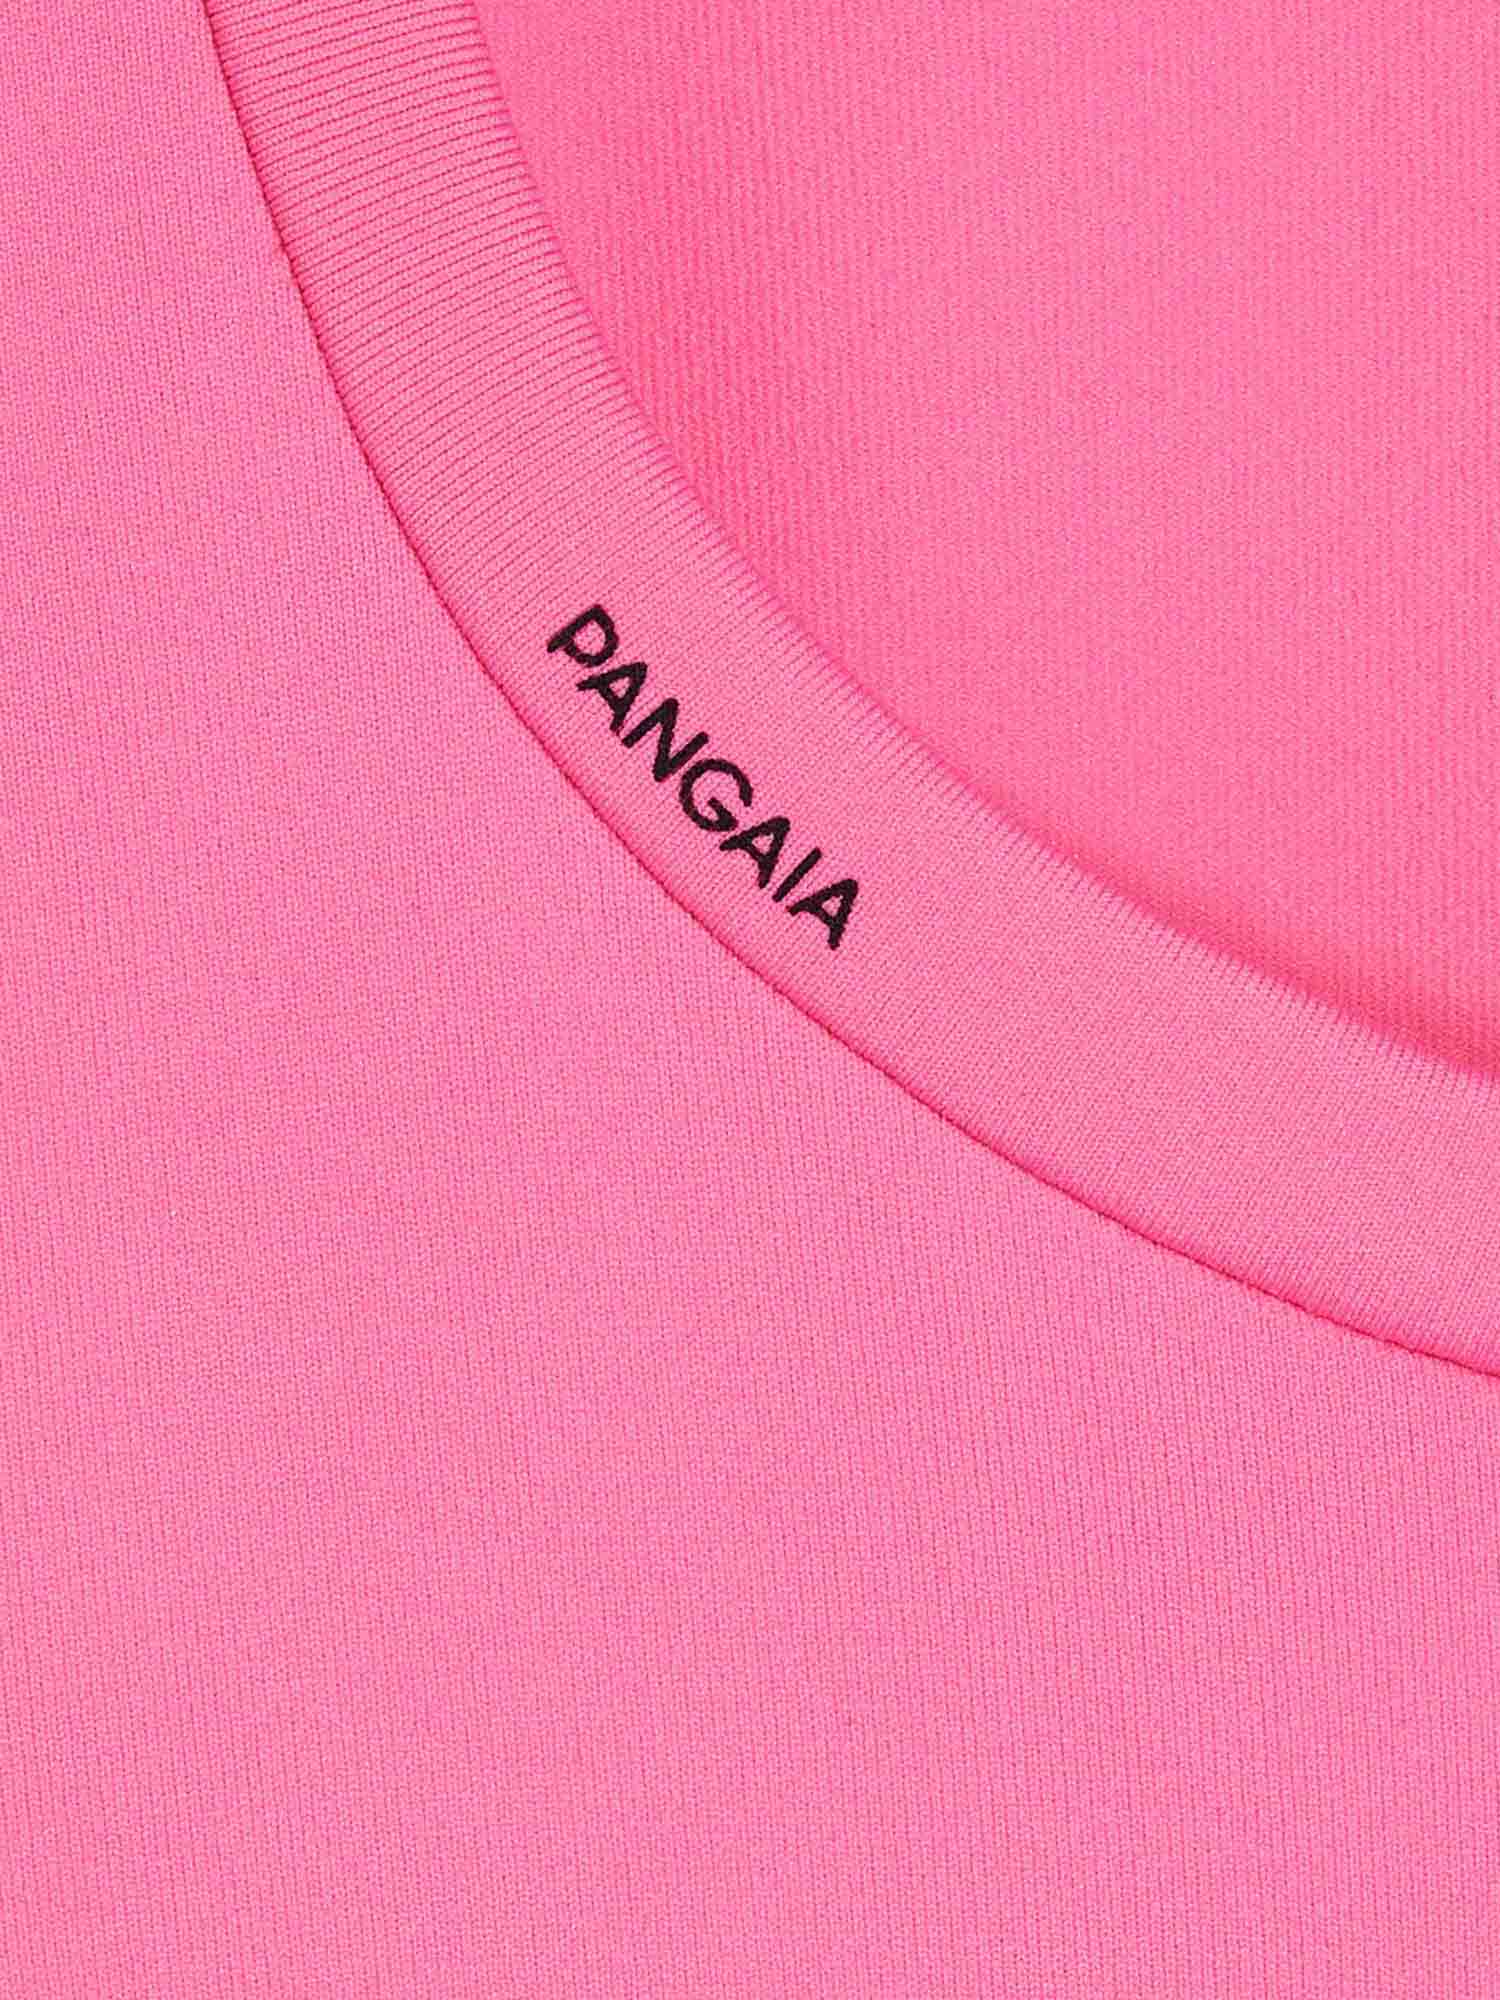 Activewear Womens Cropped Top Watermelon Pink 